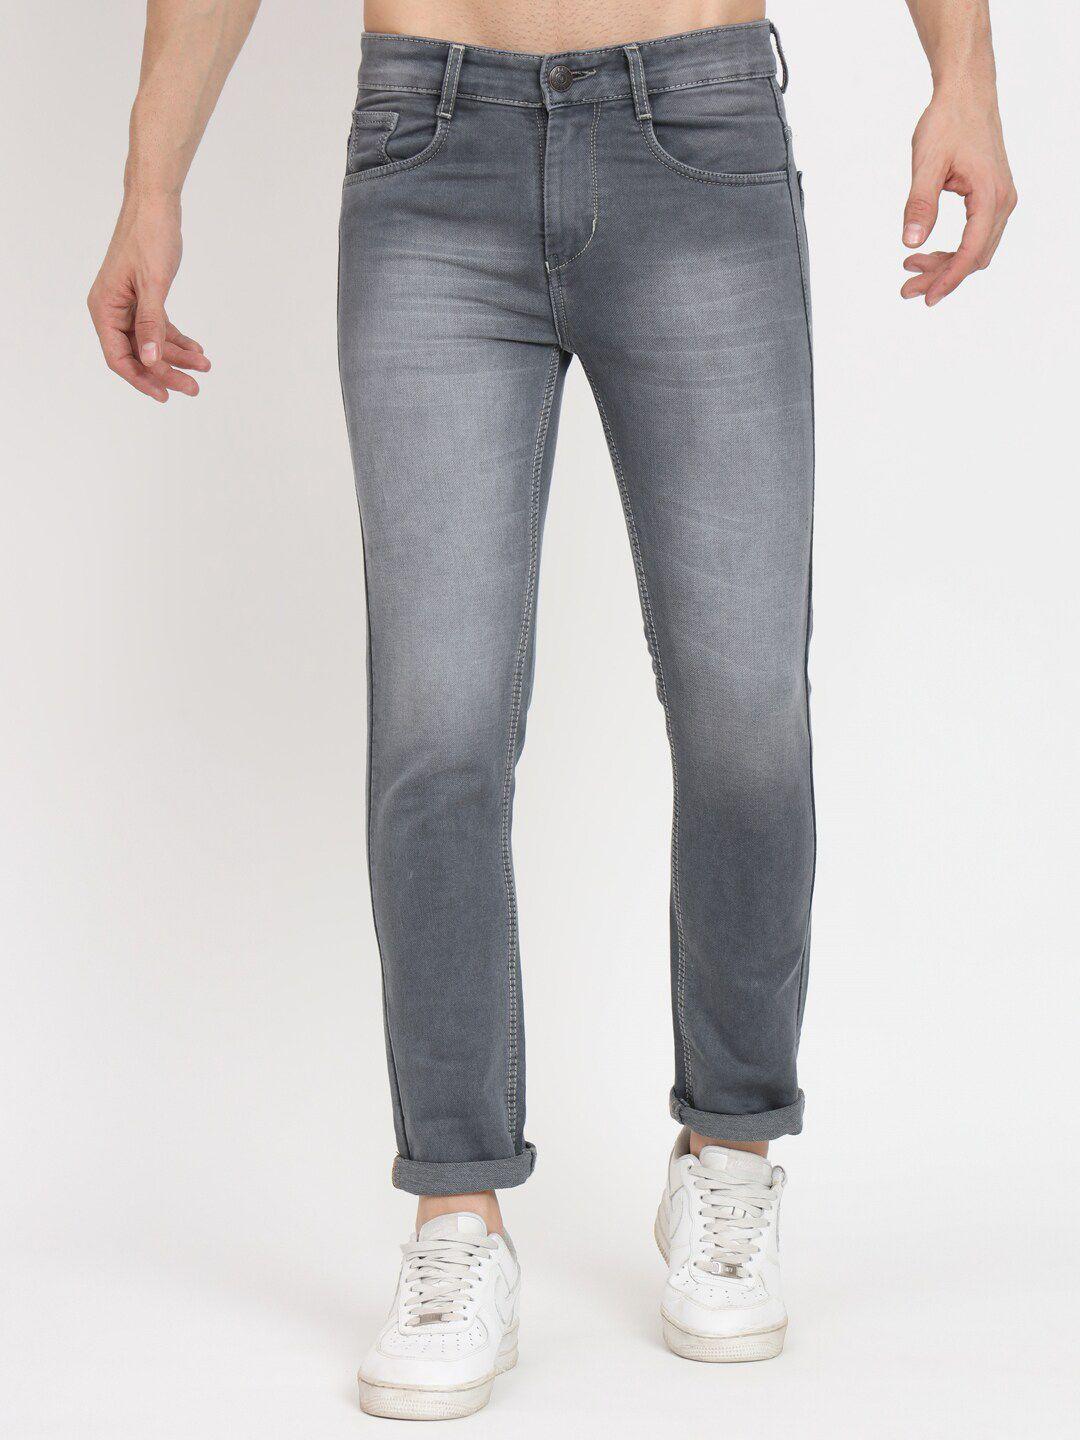 ragzo-men-slim-fit-clean-look-heavy-fade-stretchable-jeans